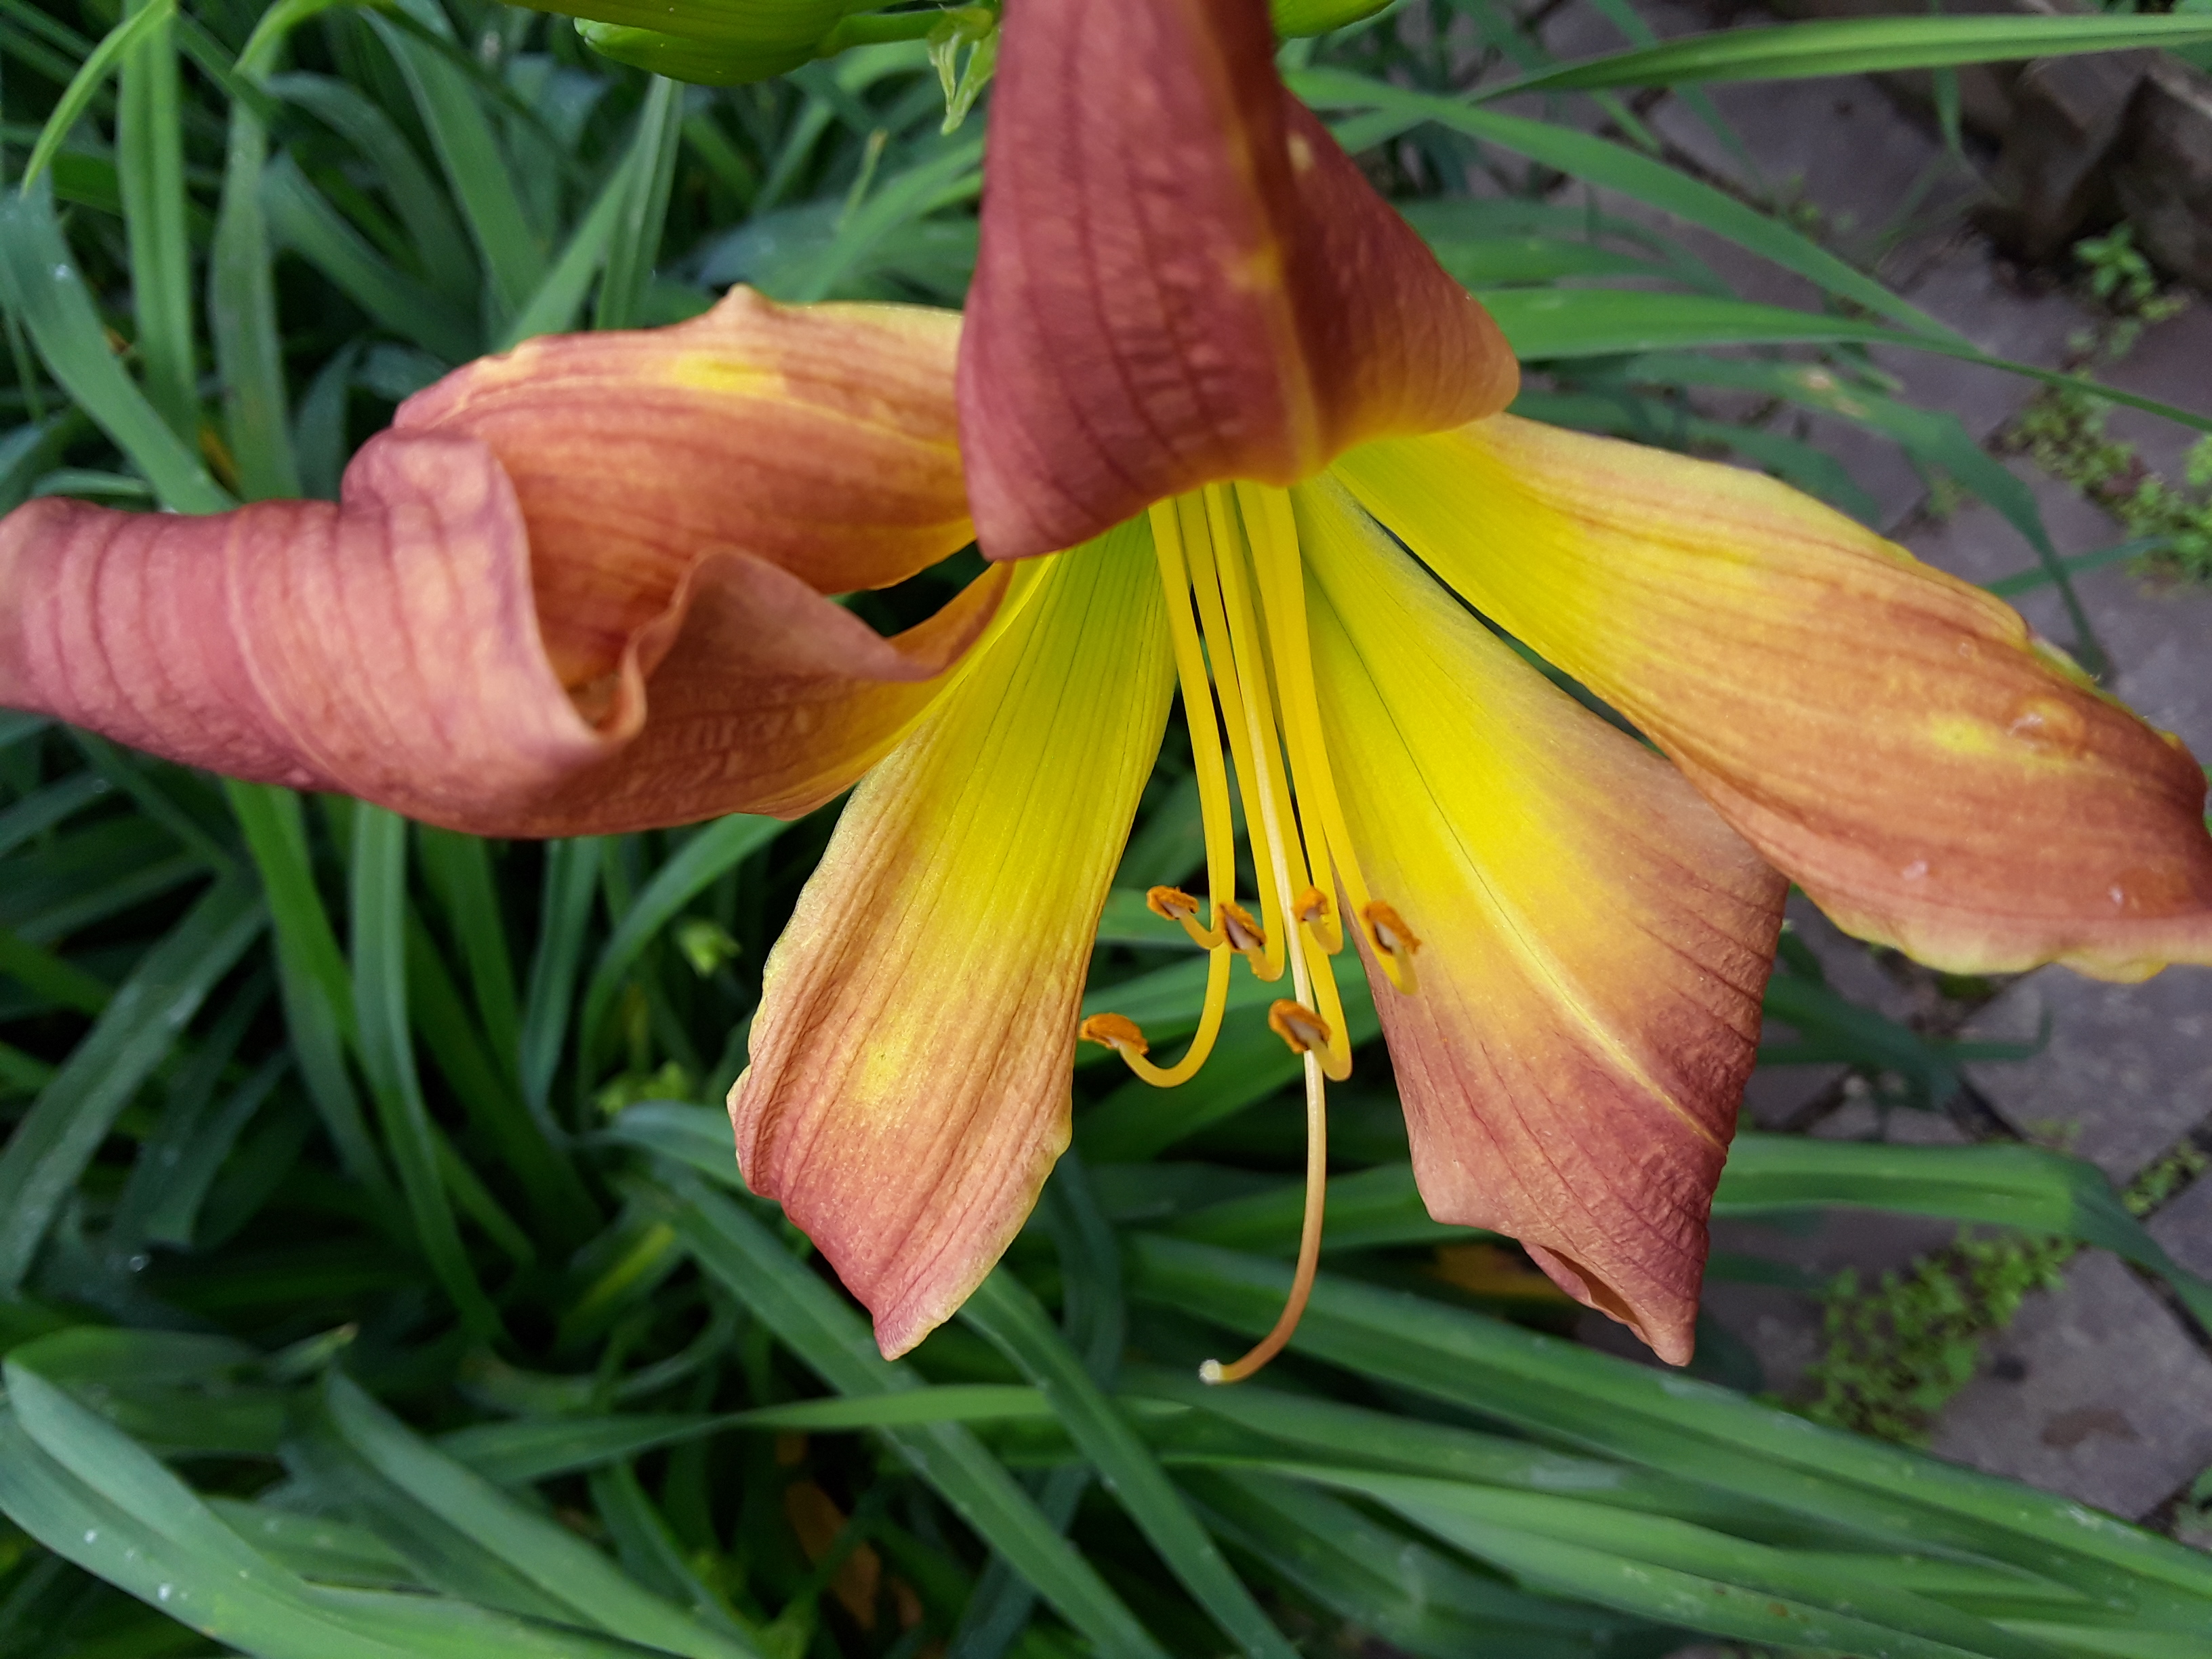 Day lily bloom shows a bright yellow throt with dark peach colored outer petals